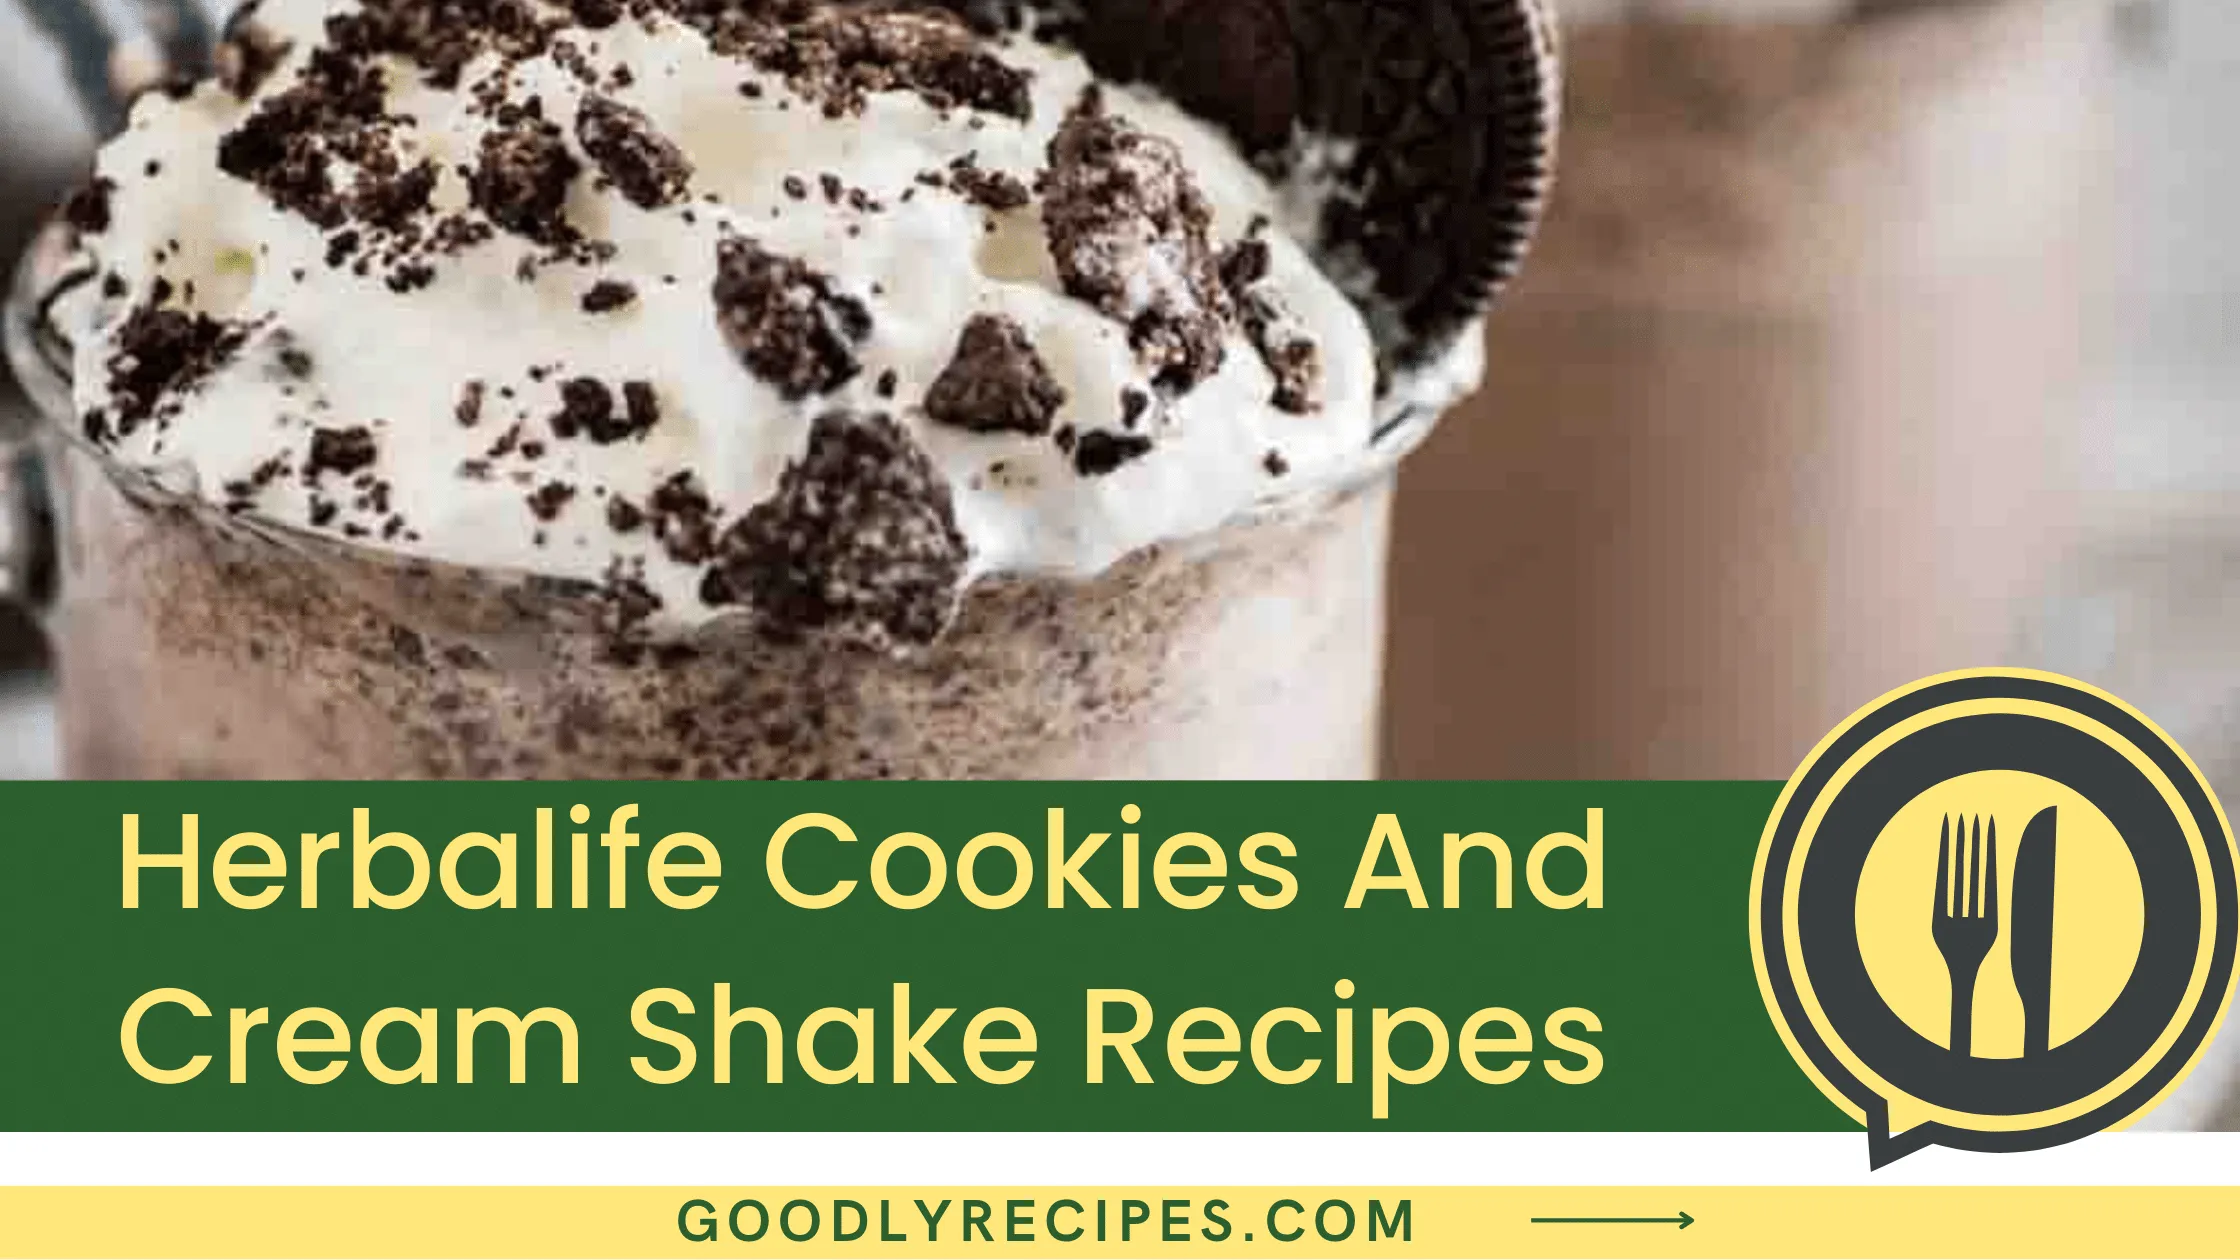 What is Herbalife Cookies And Cream Shake?